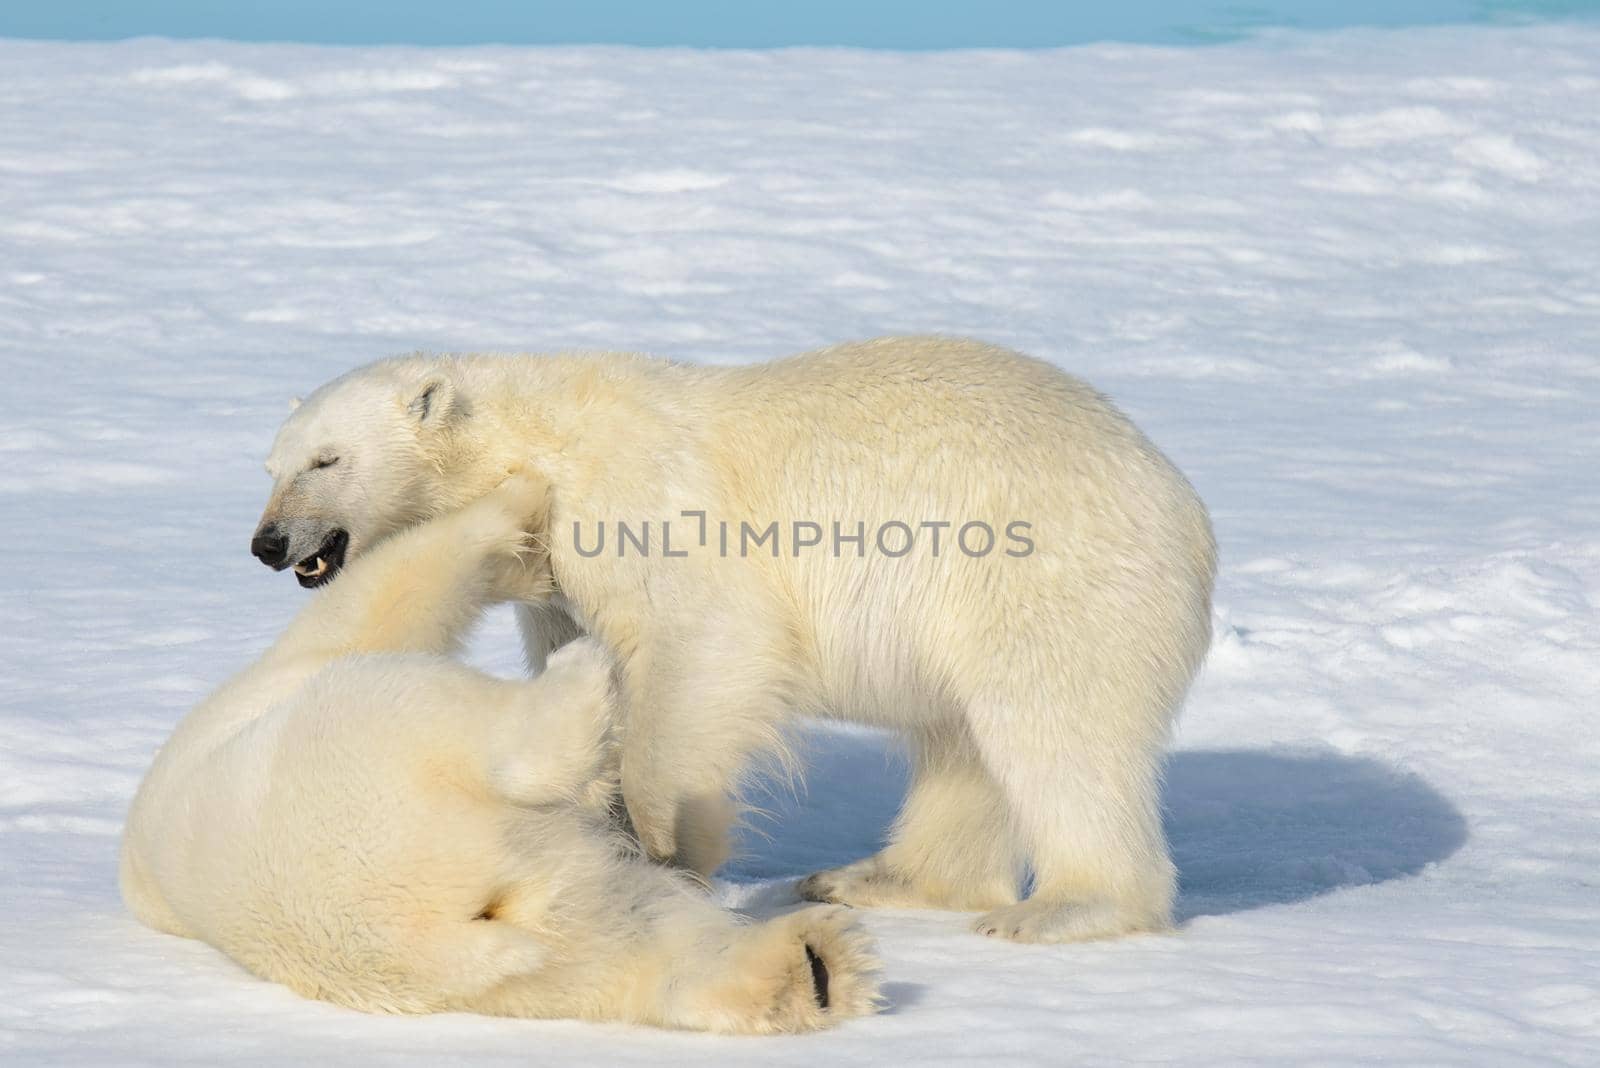 Two polar bear cubs playing together on the ice north of Svalbard